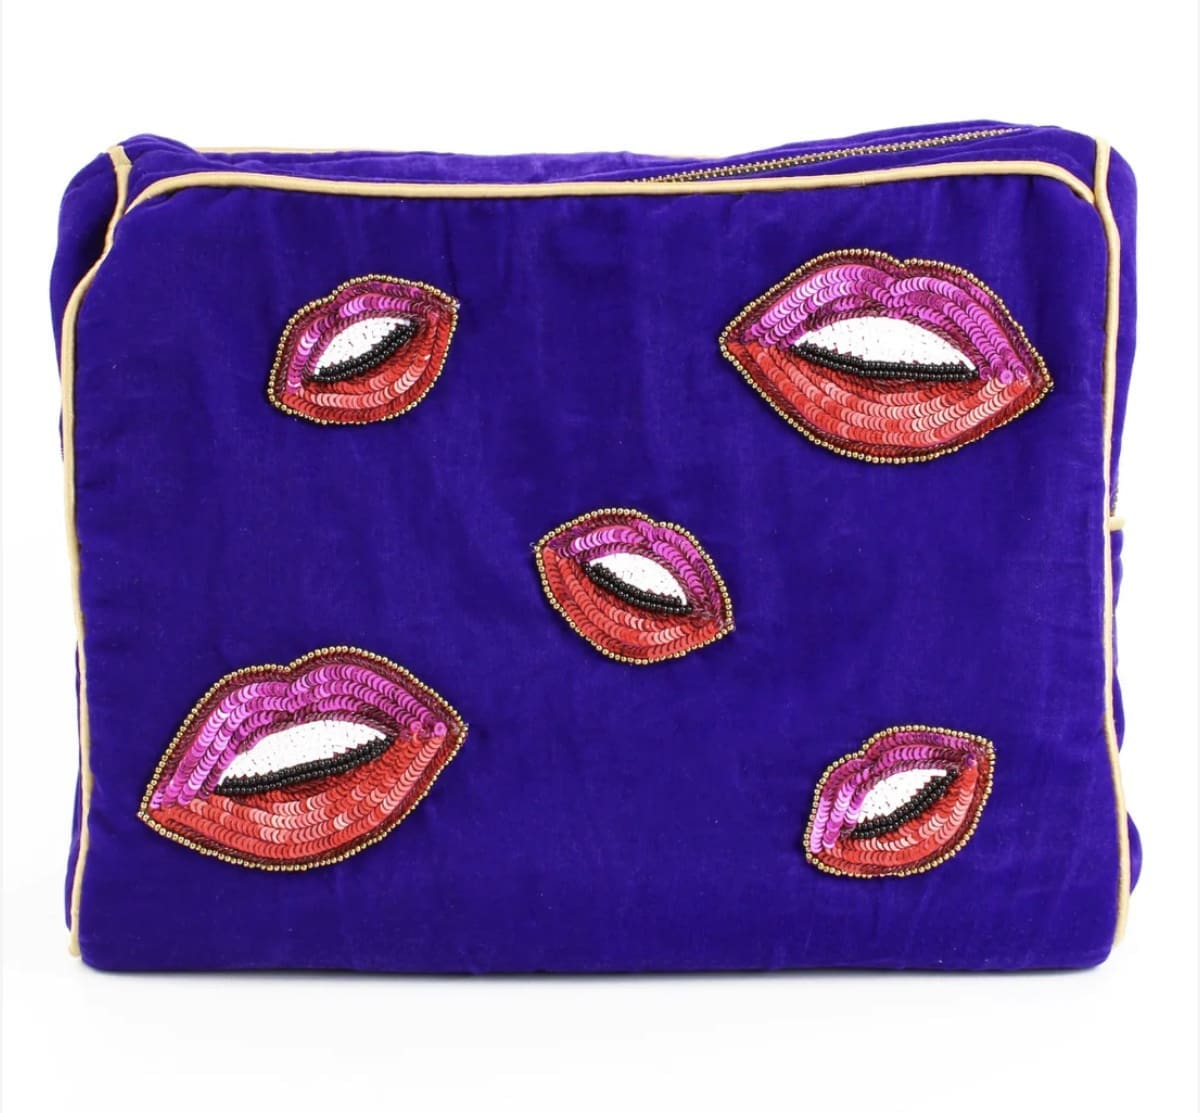 A purple cosmetic bag with red lips on it.